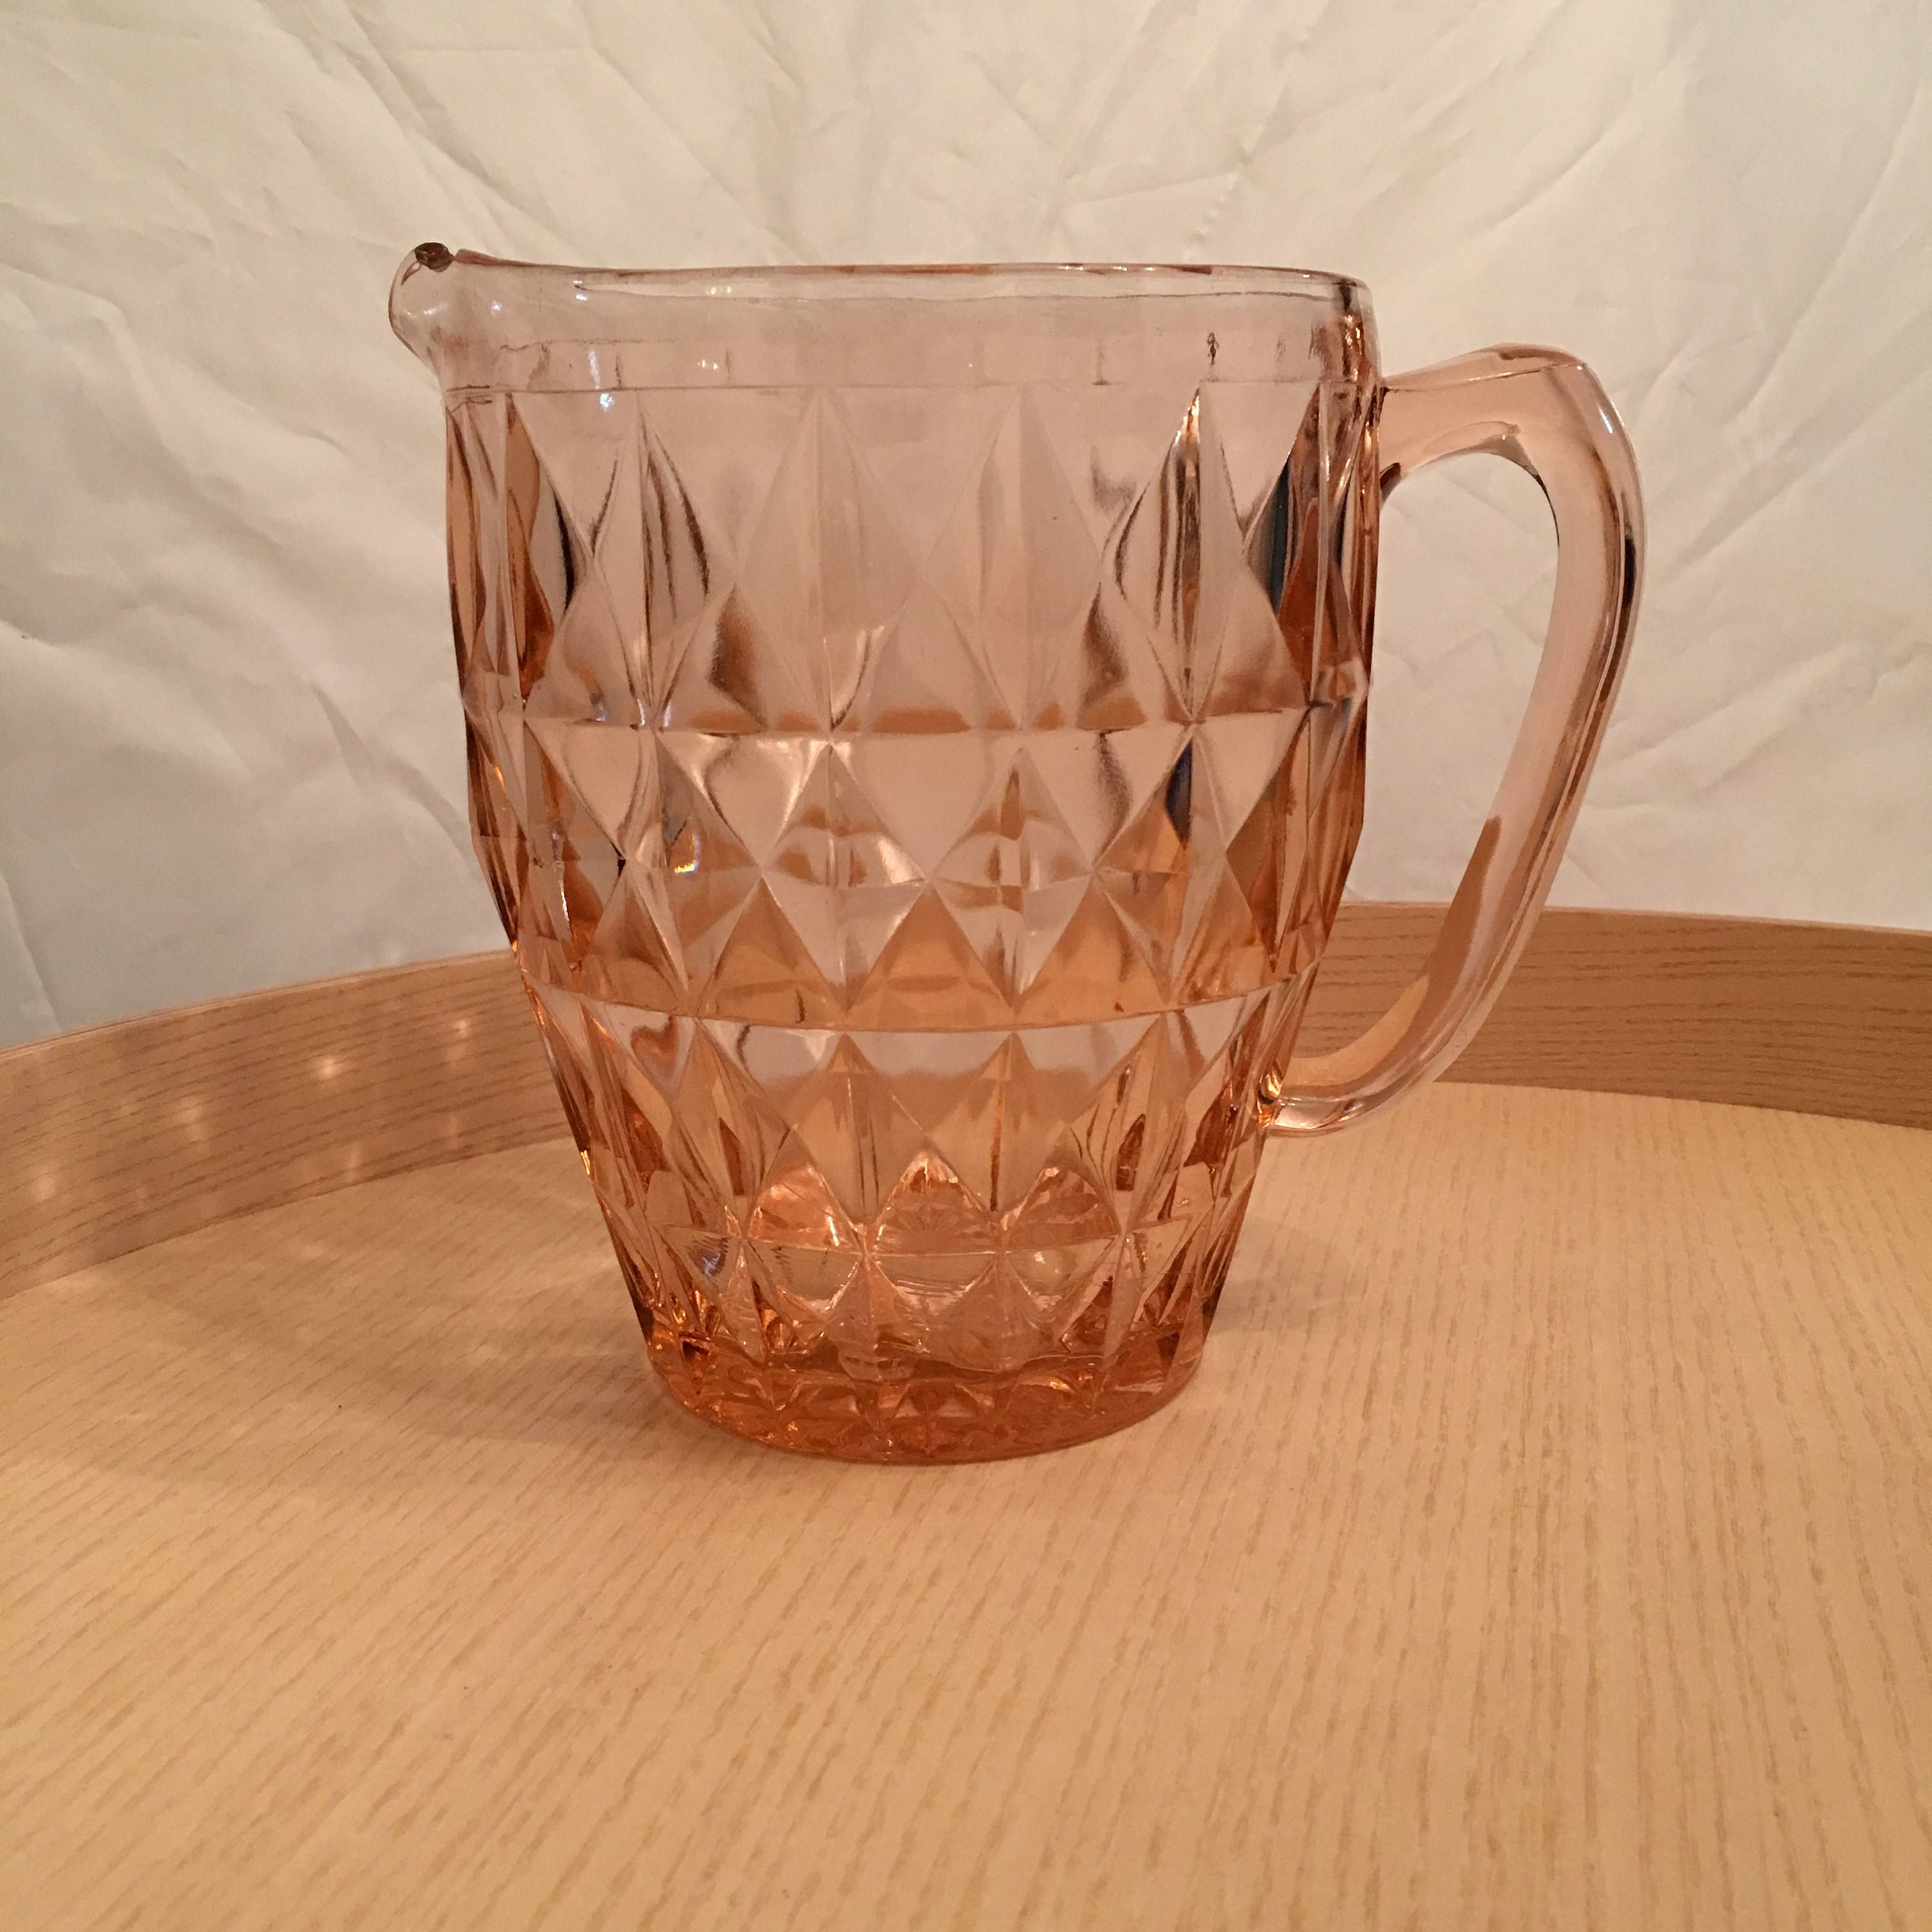 30 Famous Waterford Lismore Sugar Bud Vase 2024 free download waterford lismore sugar bud vase of depression glass jeannette windsor diamond pitcher vase large pink for depression glass jeannette windsor diamond pitcher large pink glass pitcher vintage